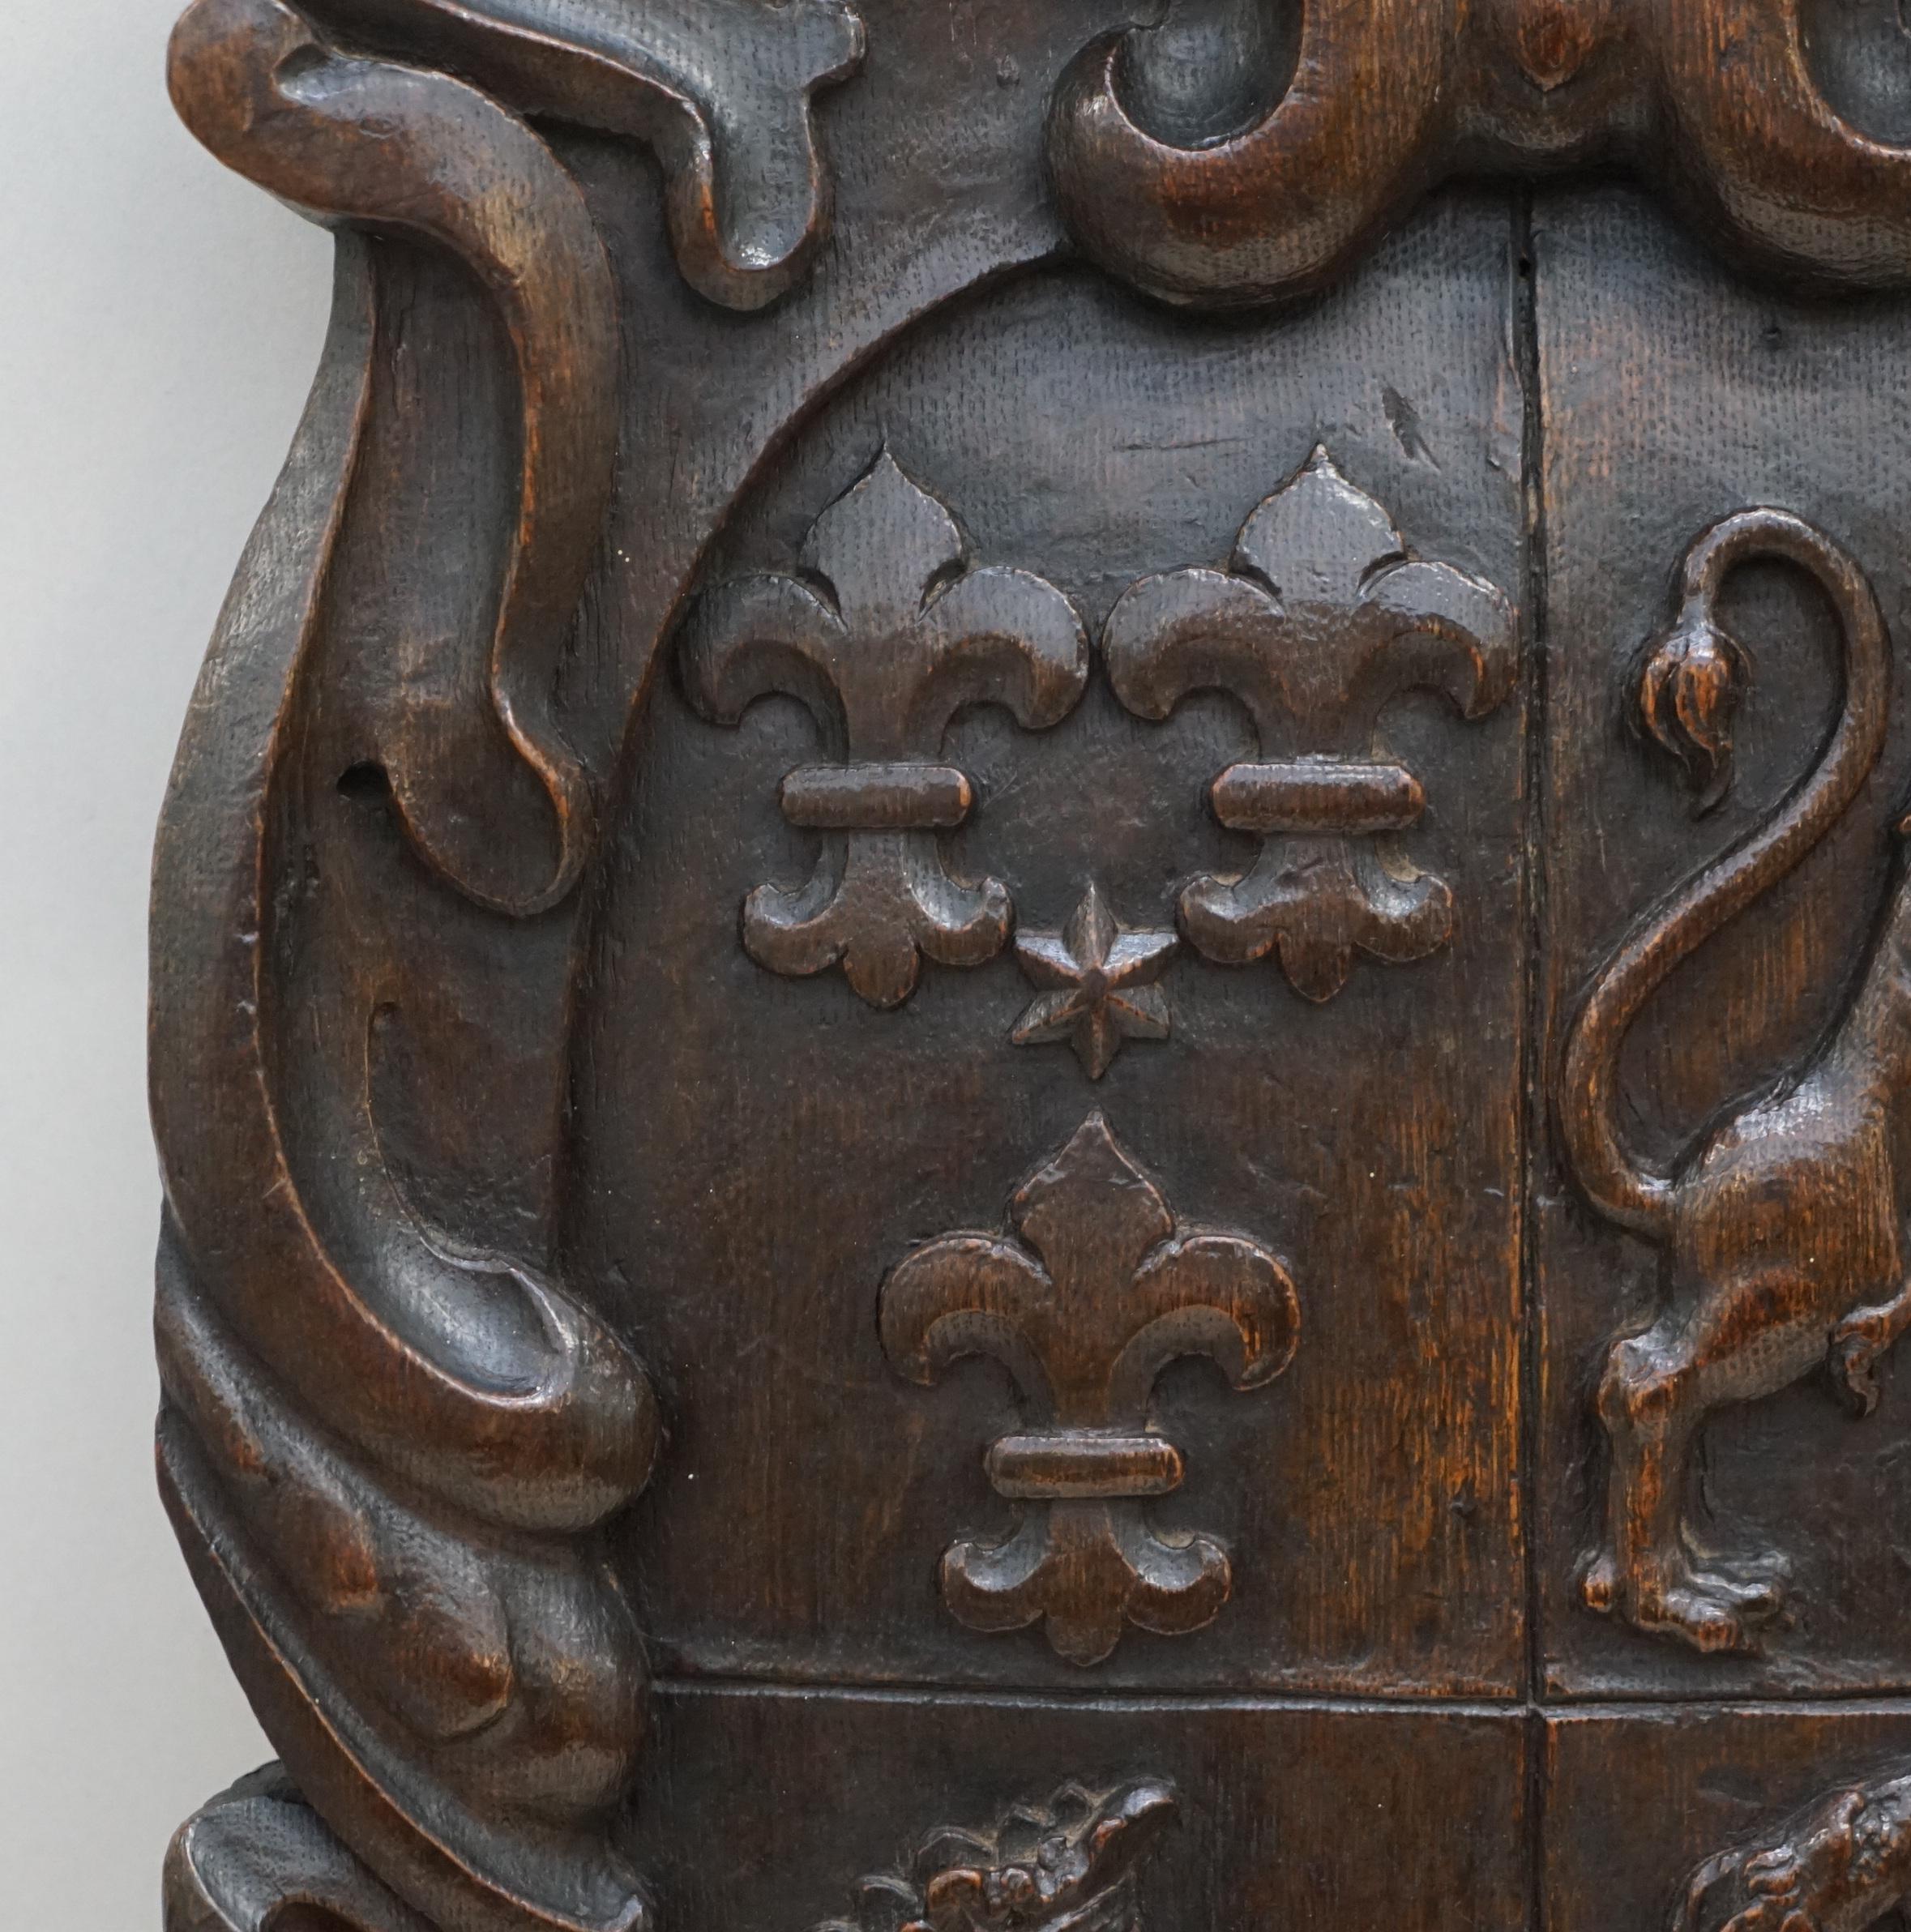 Hand-Crafted Rare Hand Carved Royal Coat of Arms 1660 Armorial Crest Solid Oak Stunning Find